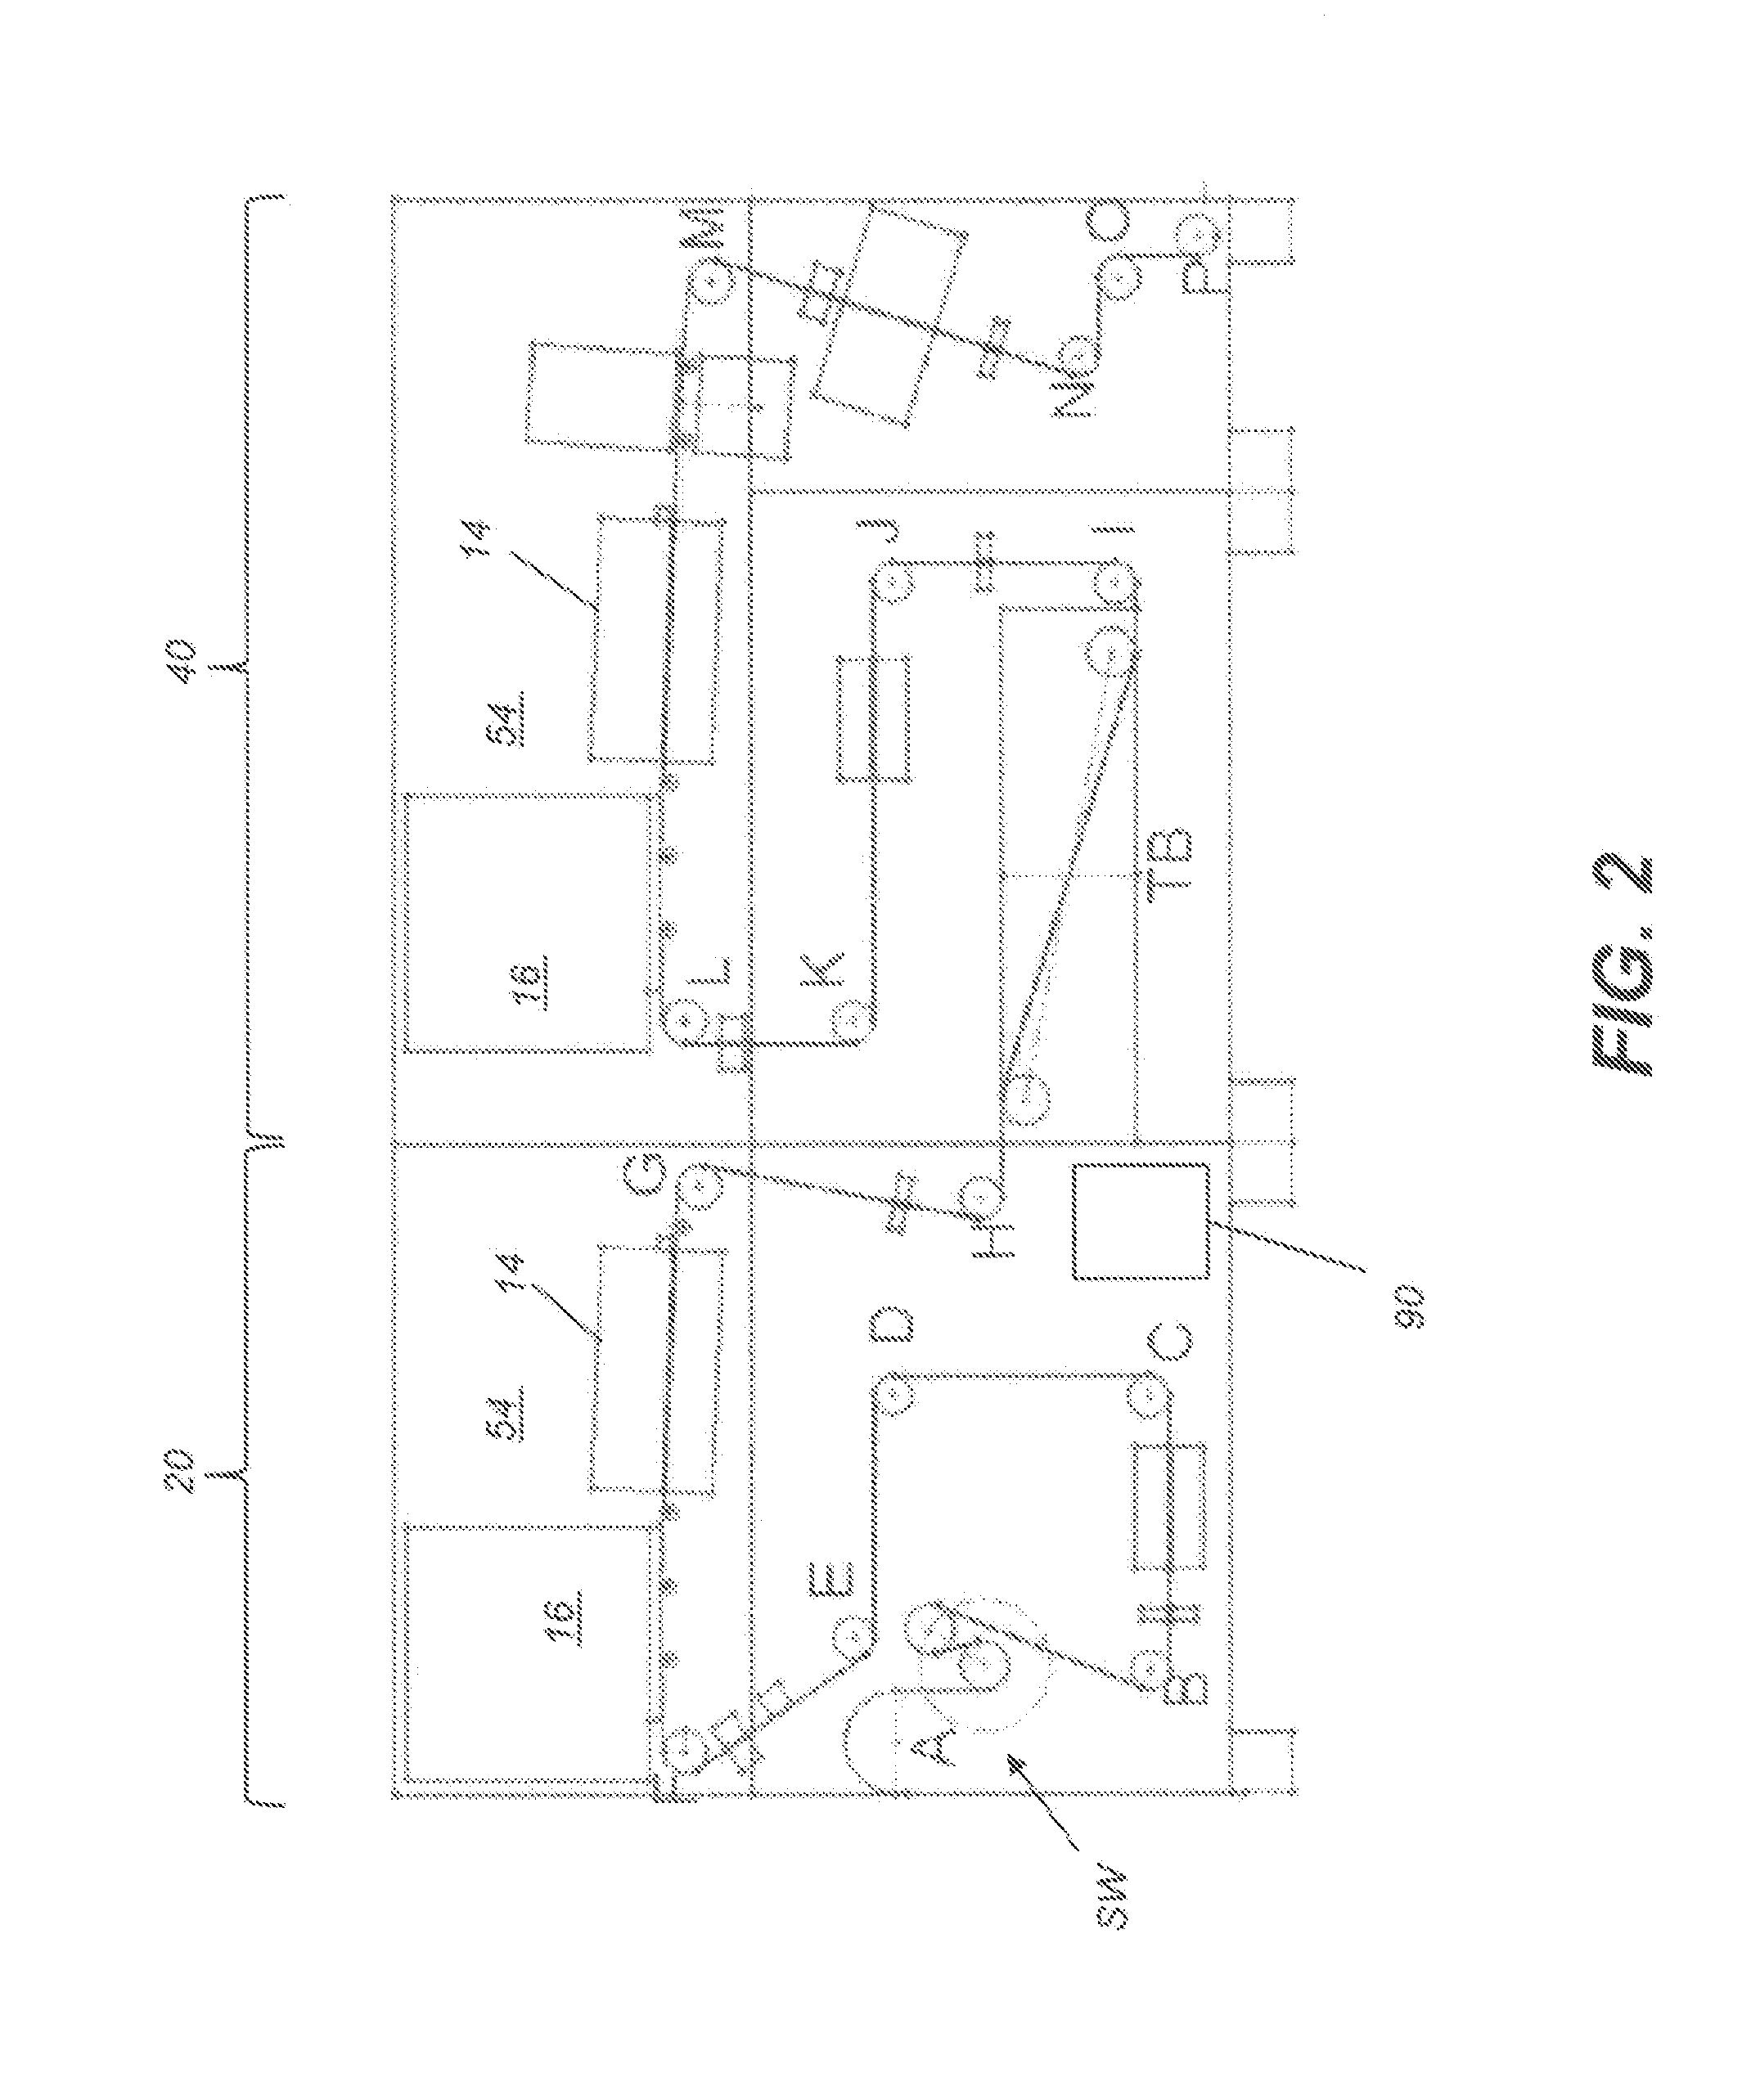 System for reducing tension fluctuations on a web